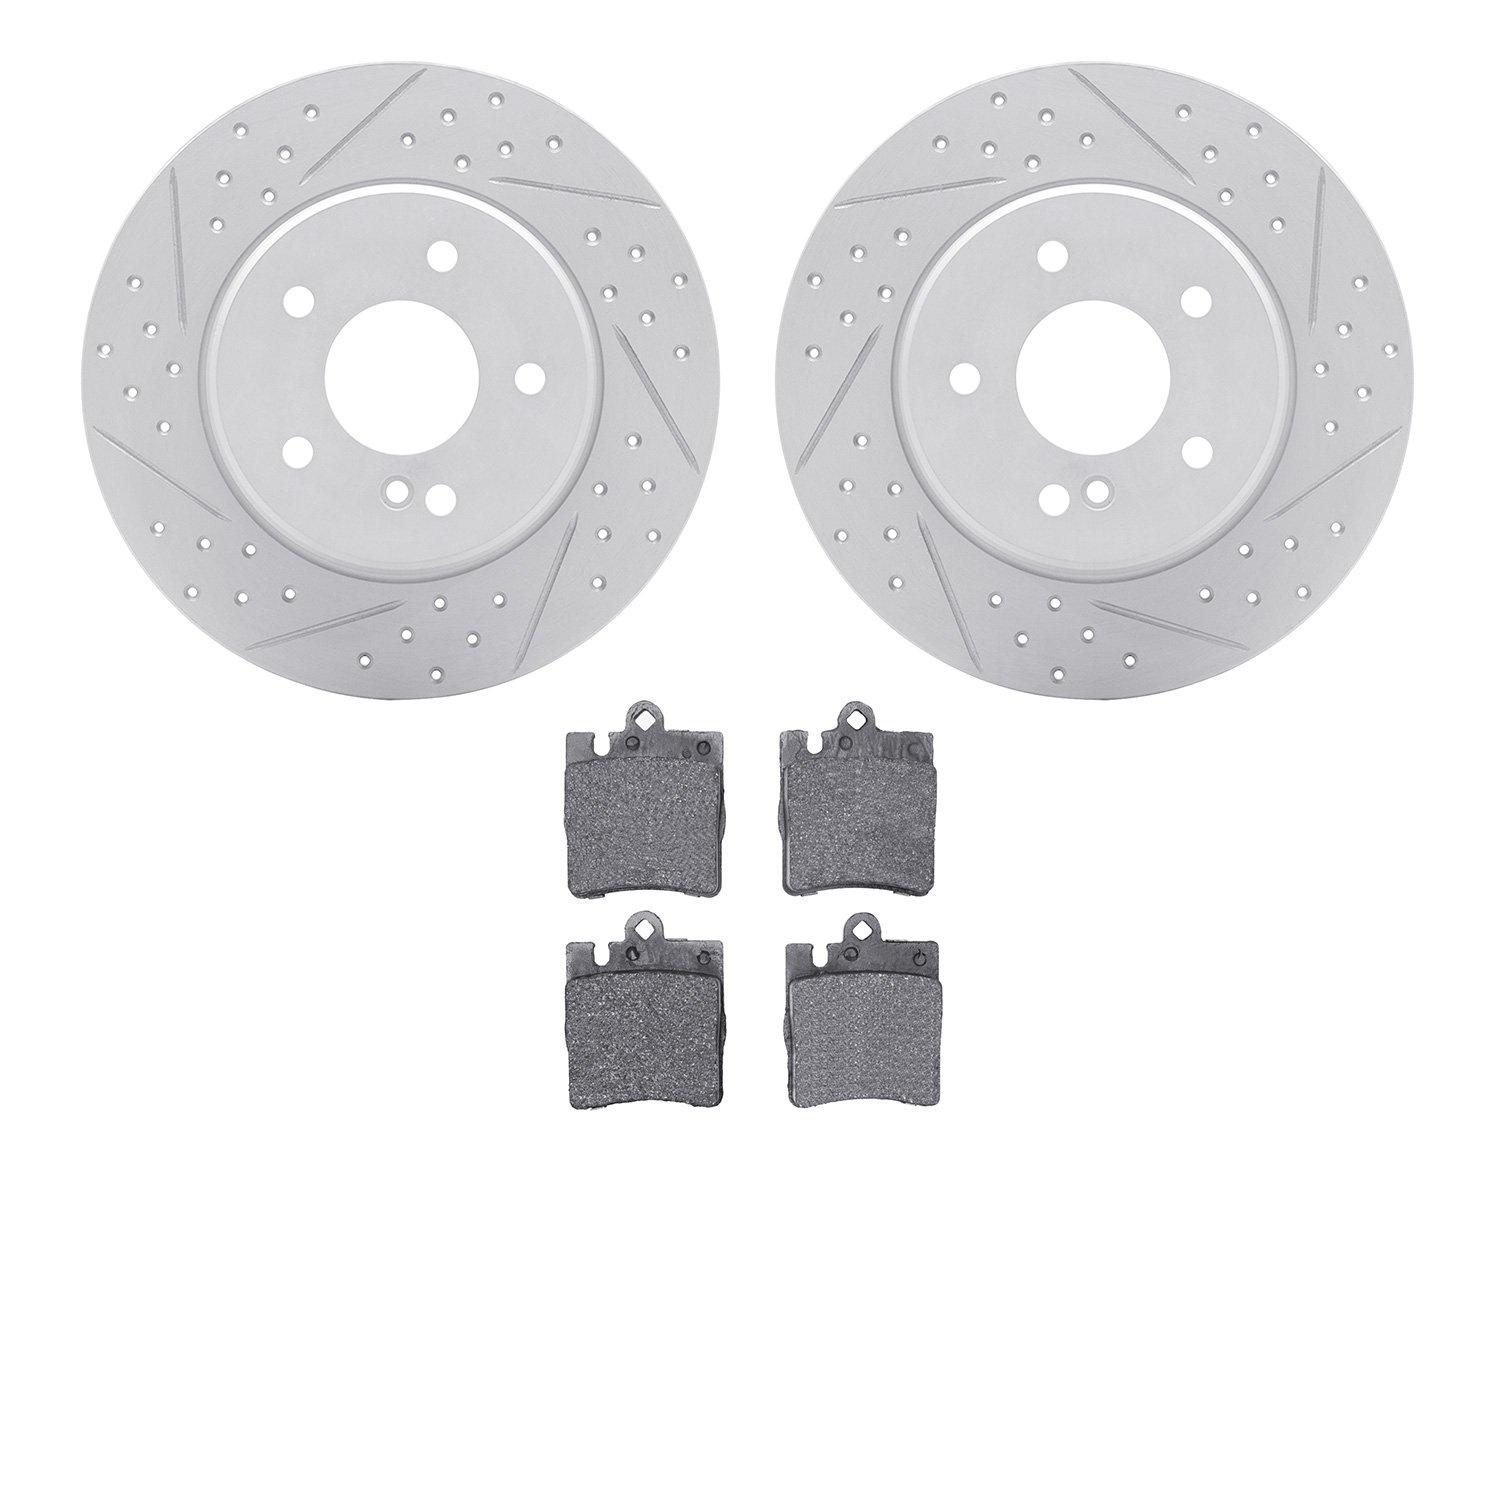 2502-63016 Geoperformance Drilled/Slotted Rotors w/5000 Advanced Brake Pads Kit, 1996-2011 Mercedes-Benz, Position: Rear